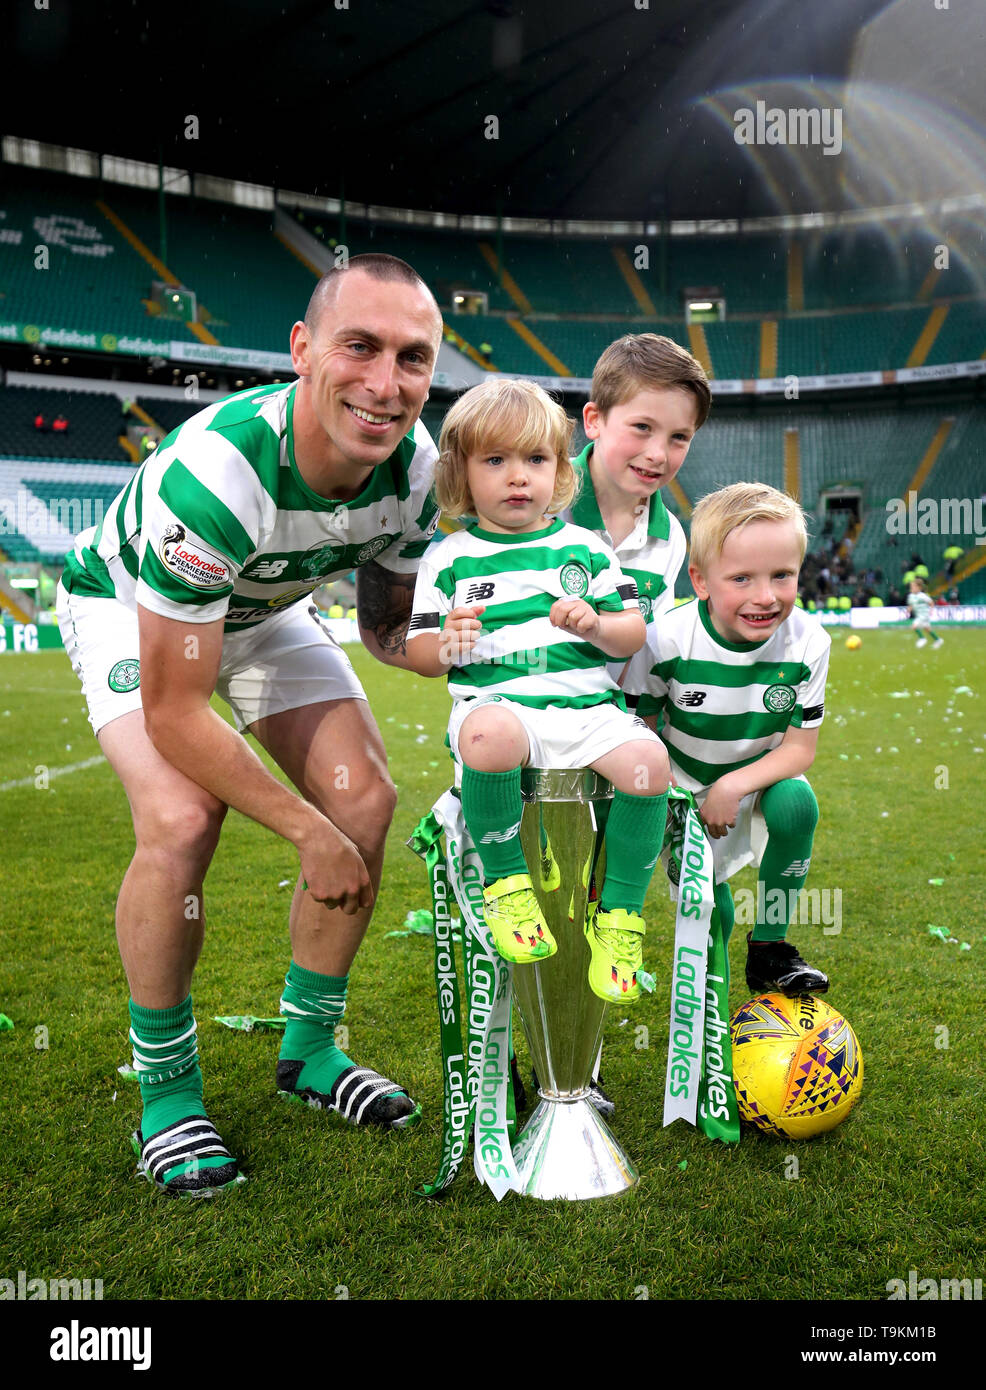 Celtic S Scott Brown And His Children With The Trophy After Winning The Ladbrokes Scottish Premiership Match At Celtic Park Glasgow Stock Photo Alamy